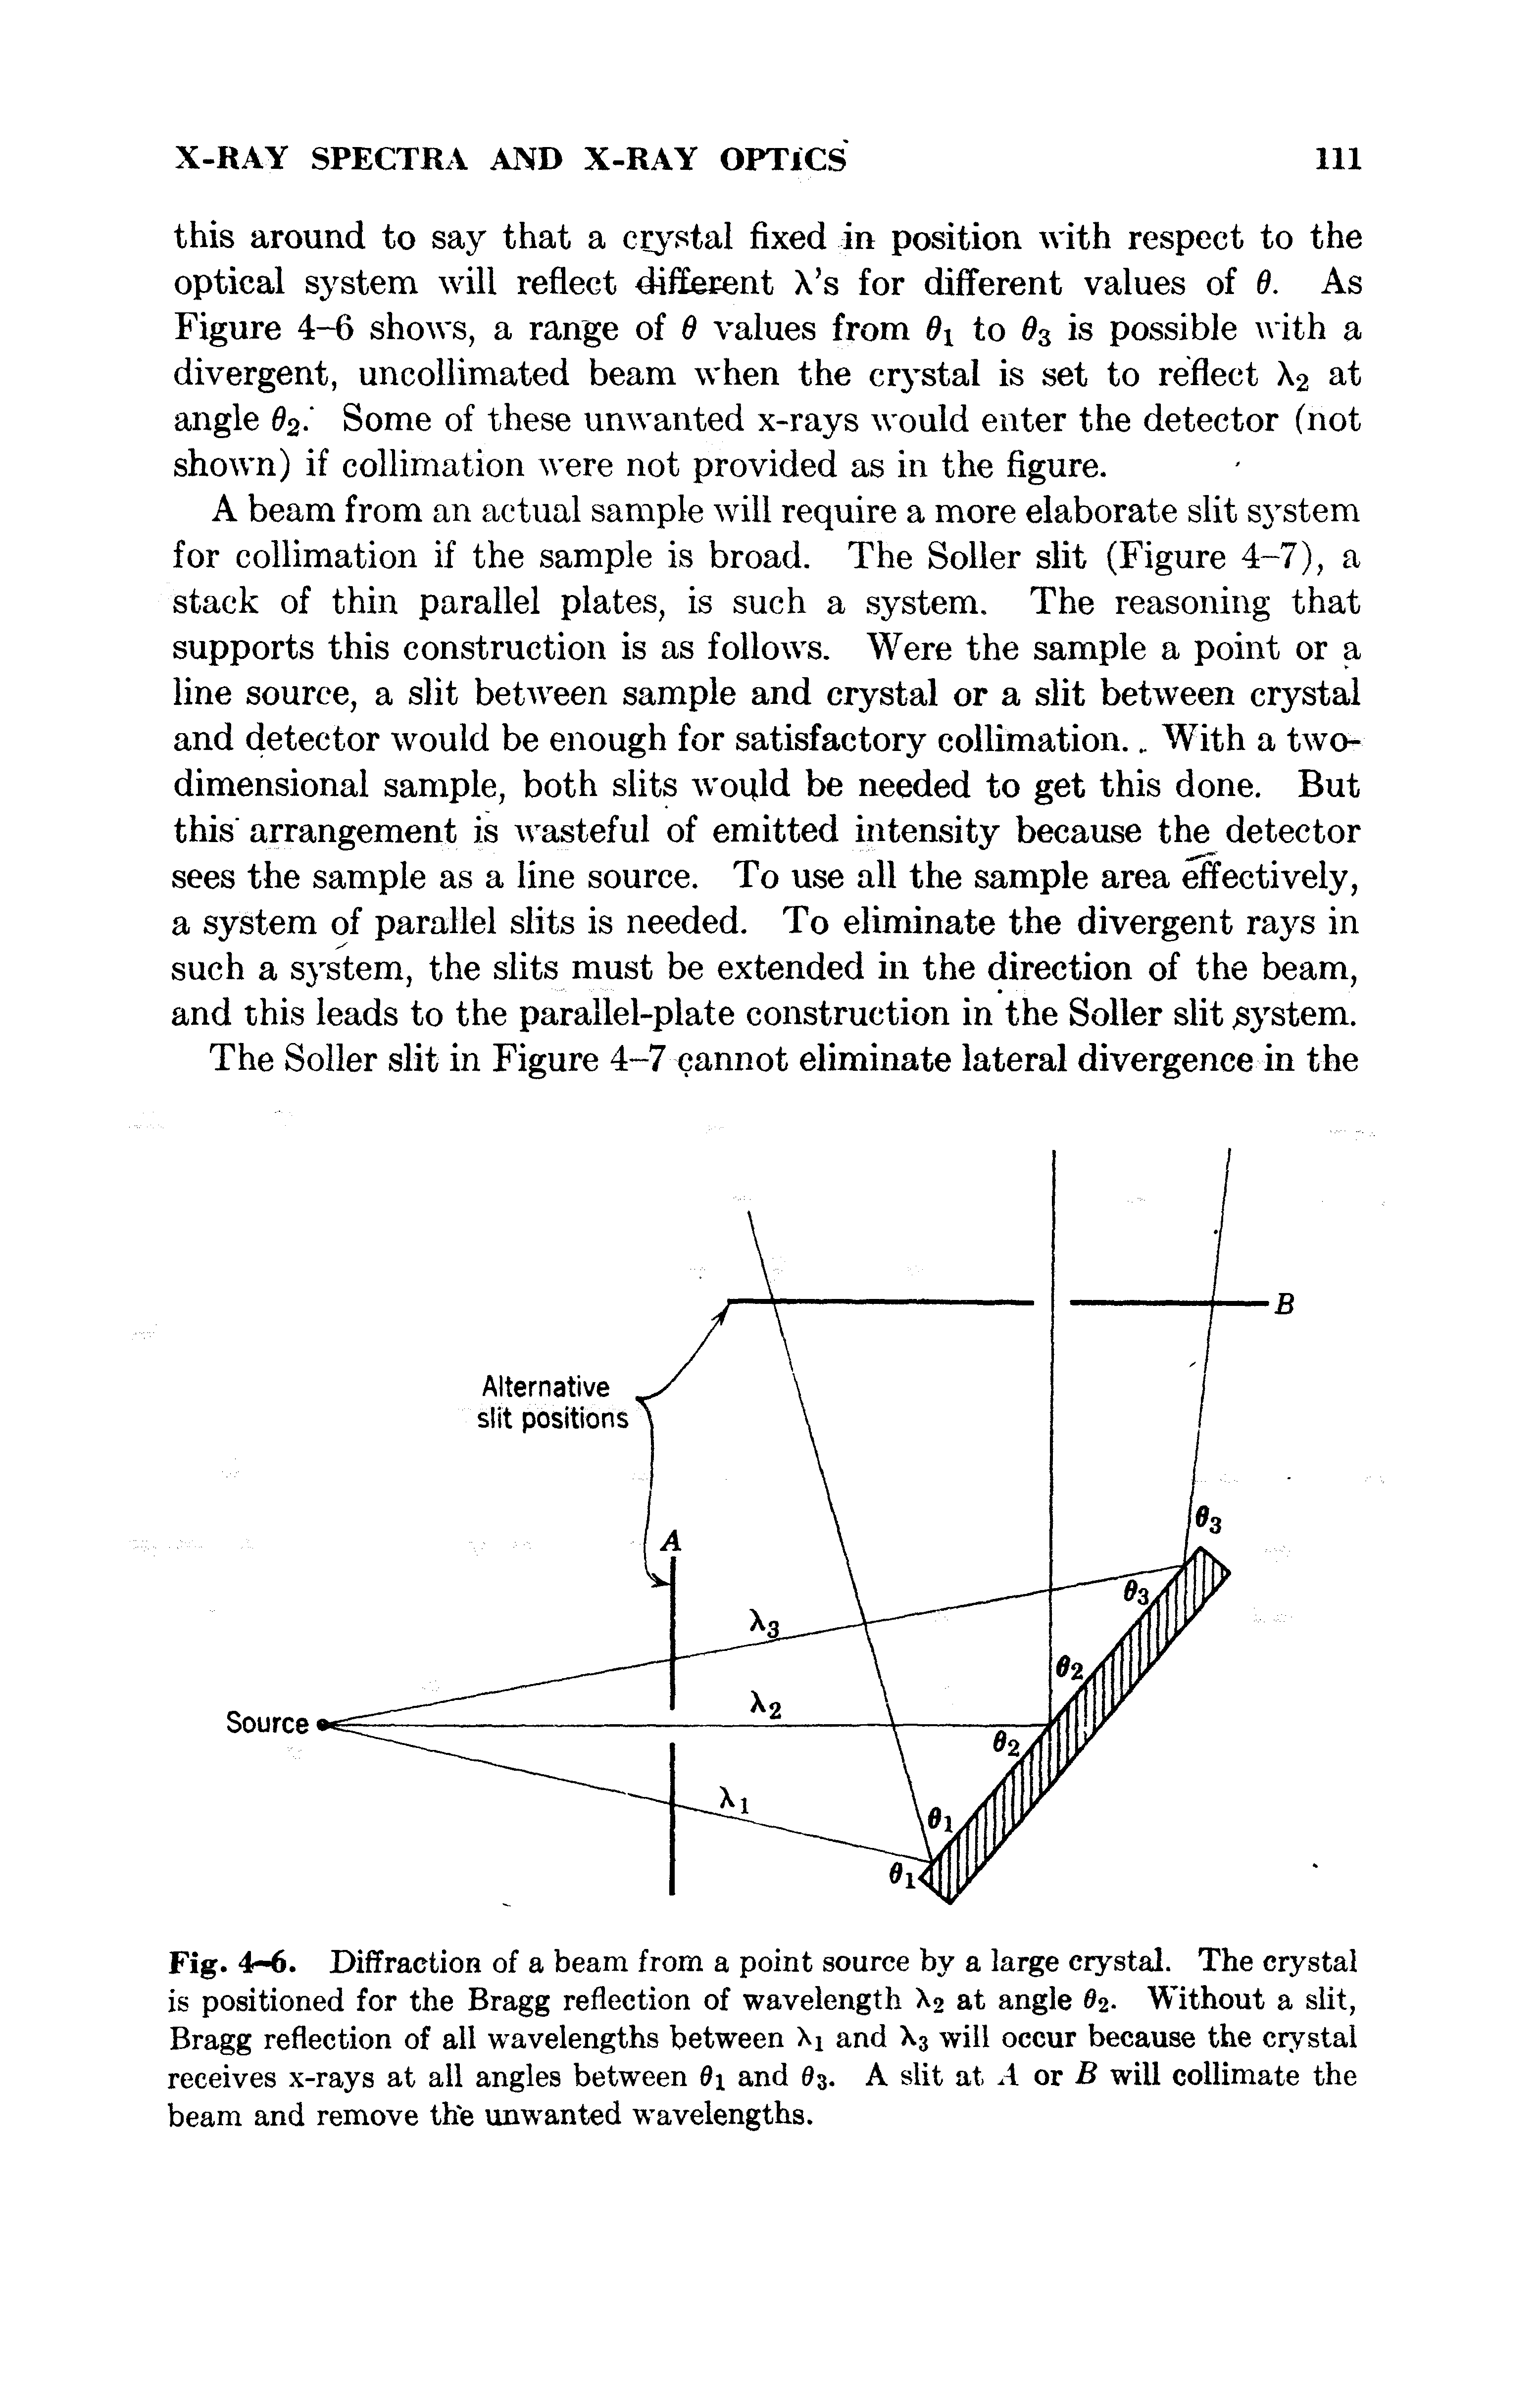 Fig. 4-6. Diffraction of a beam from a point source by a large crystal. The crystal is positioned for the Bragg reflection of wavelength X2 at angle 02 Without a slit, Bragg reflection of all wavelengths between Xi and X3 will occur because the crystal receives x-rays at all angles between 0i and 03. A slit at A or B will collimate the beam and remove the unwanted wavelengths.